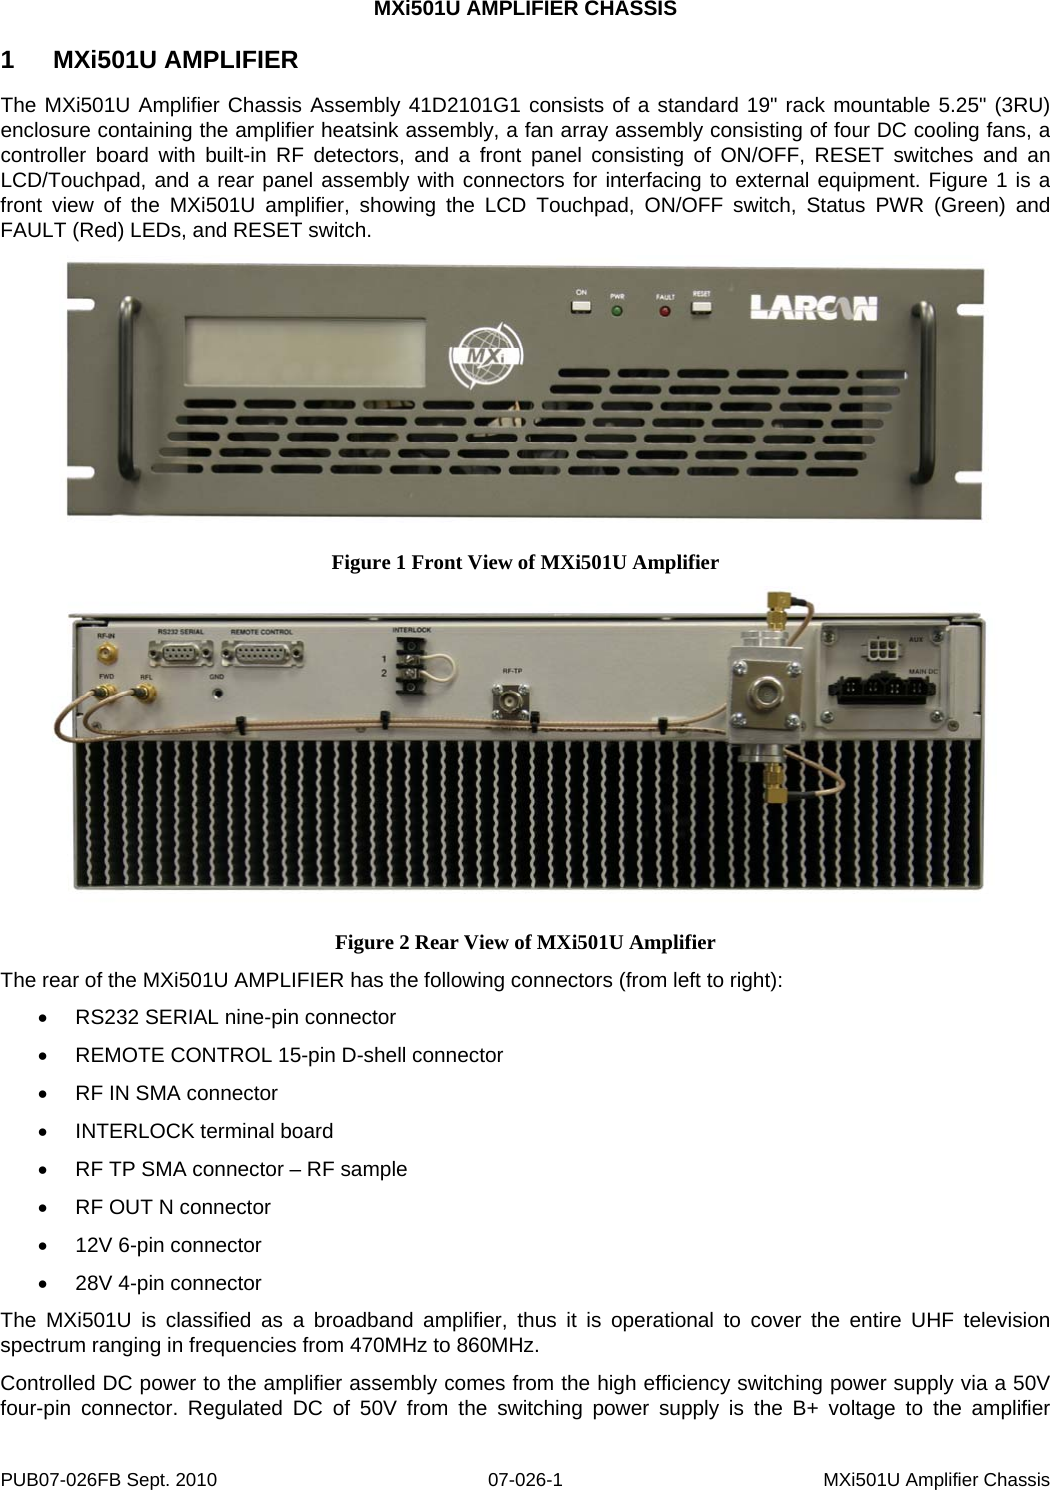 MXi501U AMPLIFIER CHASSIS 1  MXi501U AMPLIFIER The MXi501U Amplifier Chassis Assembly 41D2101G1 consists of a standard 19&quot; rack mountable 5.25&quot; (3RU) enclosure containing the amplifier heatsink assembly, a fan array assembly consisting of four DC cooling fans, a controller board with built-in RF detectors, and a front panel consisting of ON/OFF, RESET switches and an LCD/Touchpad, and a rear panel assembly with connectors for interfacing to external equipment. Figure 1 is a front view of the MXi501U amplifier, showing the LCD Touchpad, ON/OFF switch, Status PWR (Green) and FAULT (Red) LEDs, and RESET switch.  Figure 1 Front View of MXi501U Amplifier  Figure 2 Rear View of MXi501U Amplifier The rear of the MXi501U AMPLIFIER has the following connectors (from left to right): •  RS232 SERIAL nine-pin connector •  REMOTE CONTROL 15-pin D-shell connector •  RF IN SMA connector  • INTERLOCK terminal board •  RF TP SMA connector – RF sample •  RF OUT N connector •  12V 6-pin connector •  28V 4-pin connector The MXi501U is classified as a broadband amplifier, thus it is operational to cover the entire UHF television spectrum ranging in frequencies from 470MHz to 860MHz.  Controlled DC power to the amplifier assembly comes from the high efficiency switching power supply via a 50V four-pin connector. Regulated DC of 50V from the switching power supply is the B+ voltage to the amplifier PUB07-026FB Sept. 2010  07-026-1  MXi501U Amplifier Chassis 